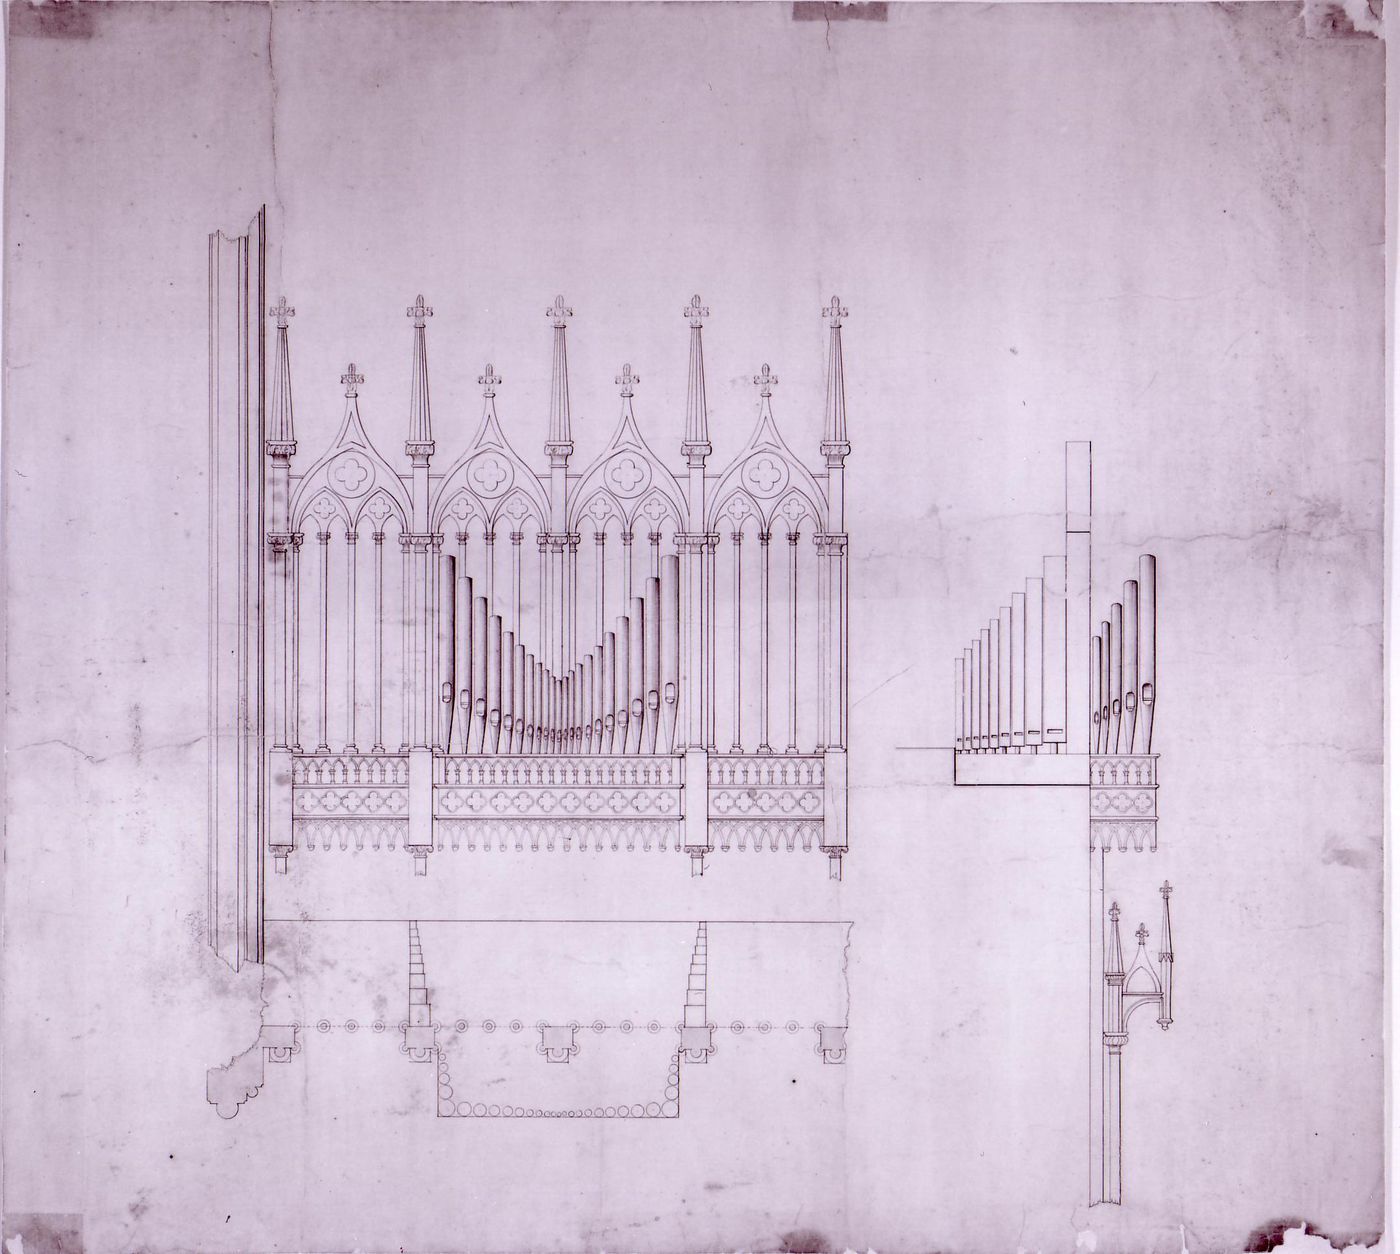 Plan and front and lateral elevations for the organ for the interior design by Bourgeau et Leprohon for Notre-Dame de Montréal